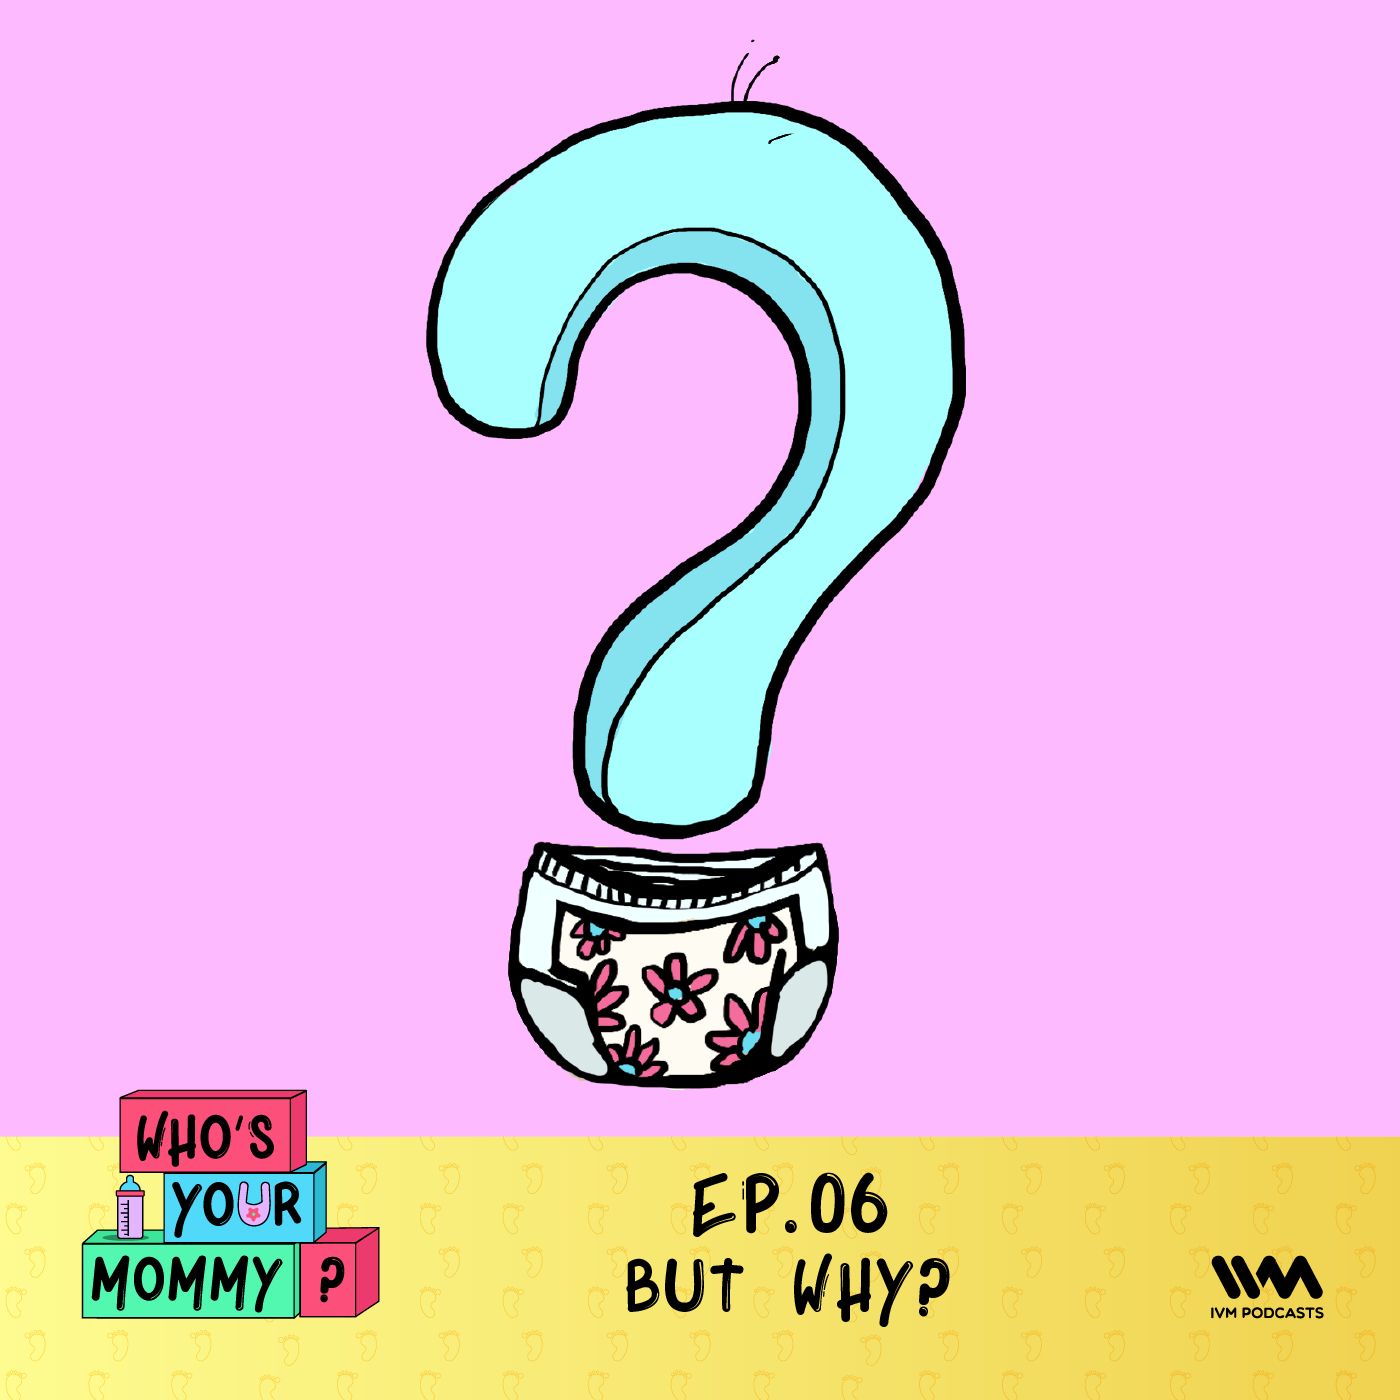 Ep. 06: But Why?